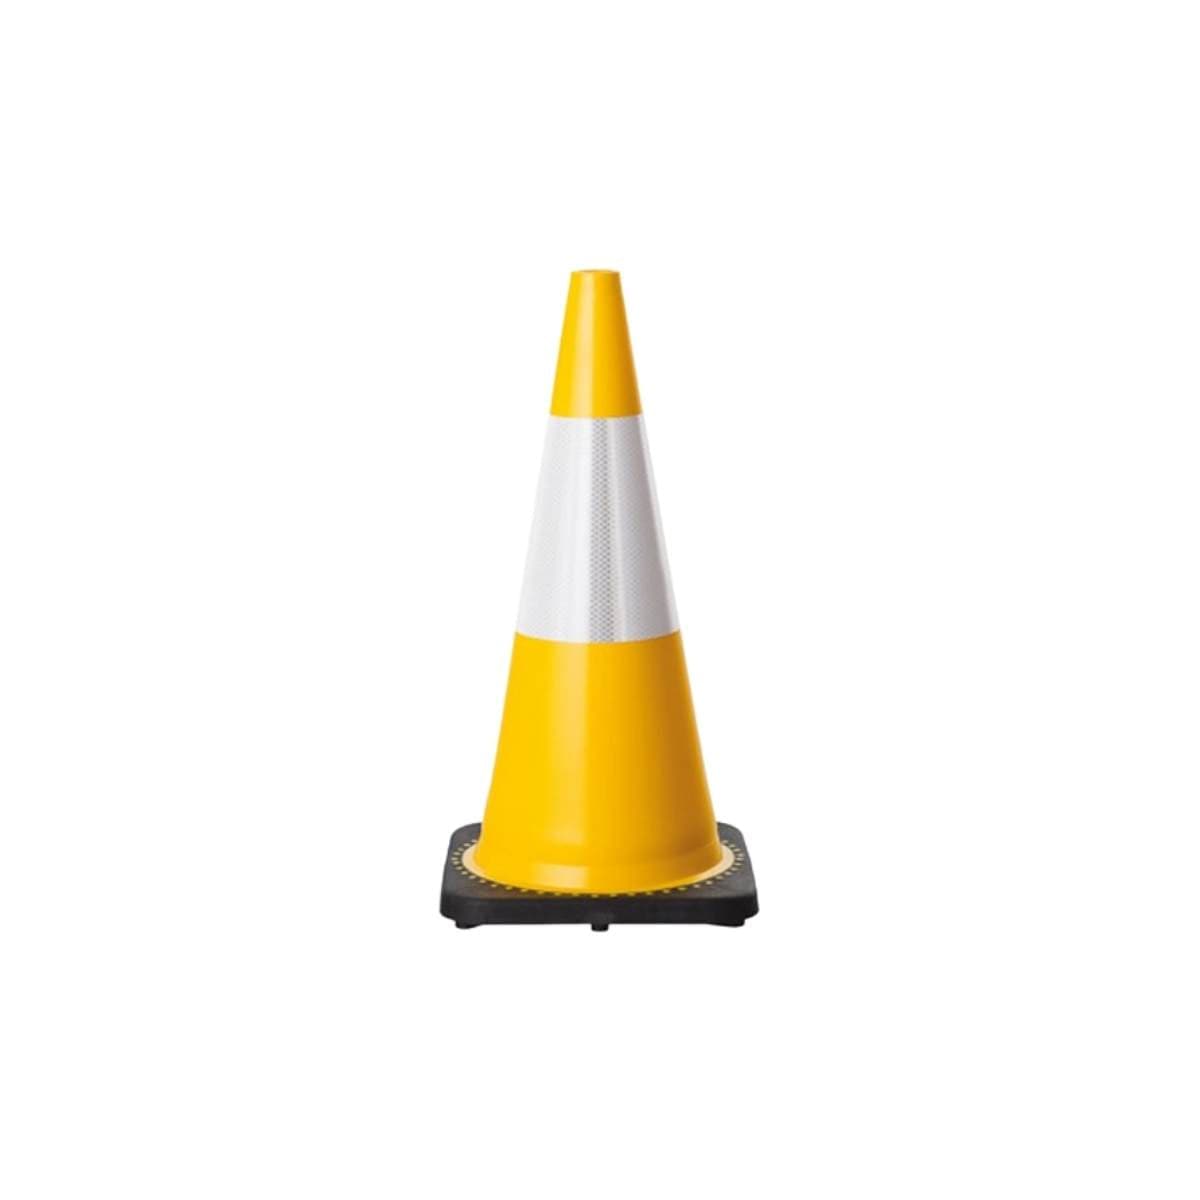 KWN Fluro Traffic Cone With 3M 3340 Class 1 Reflective Tape